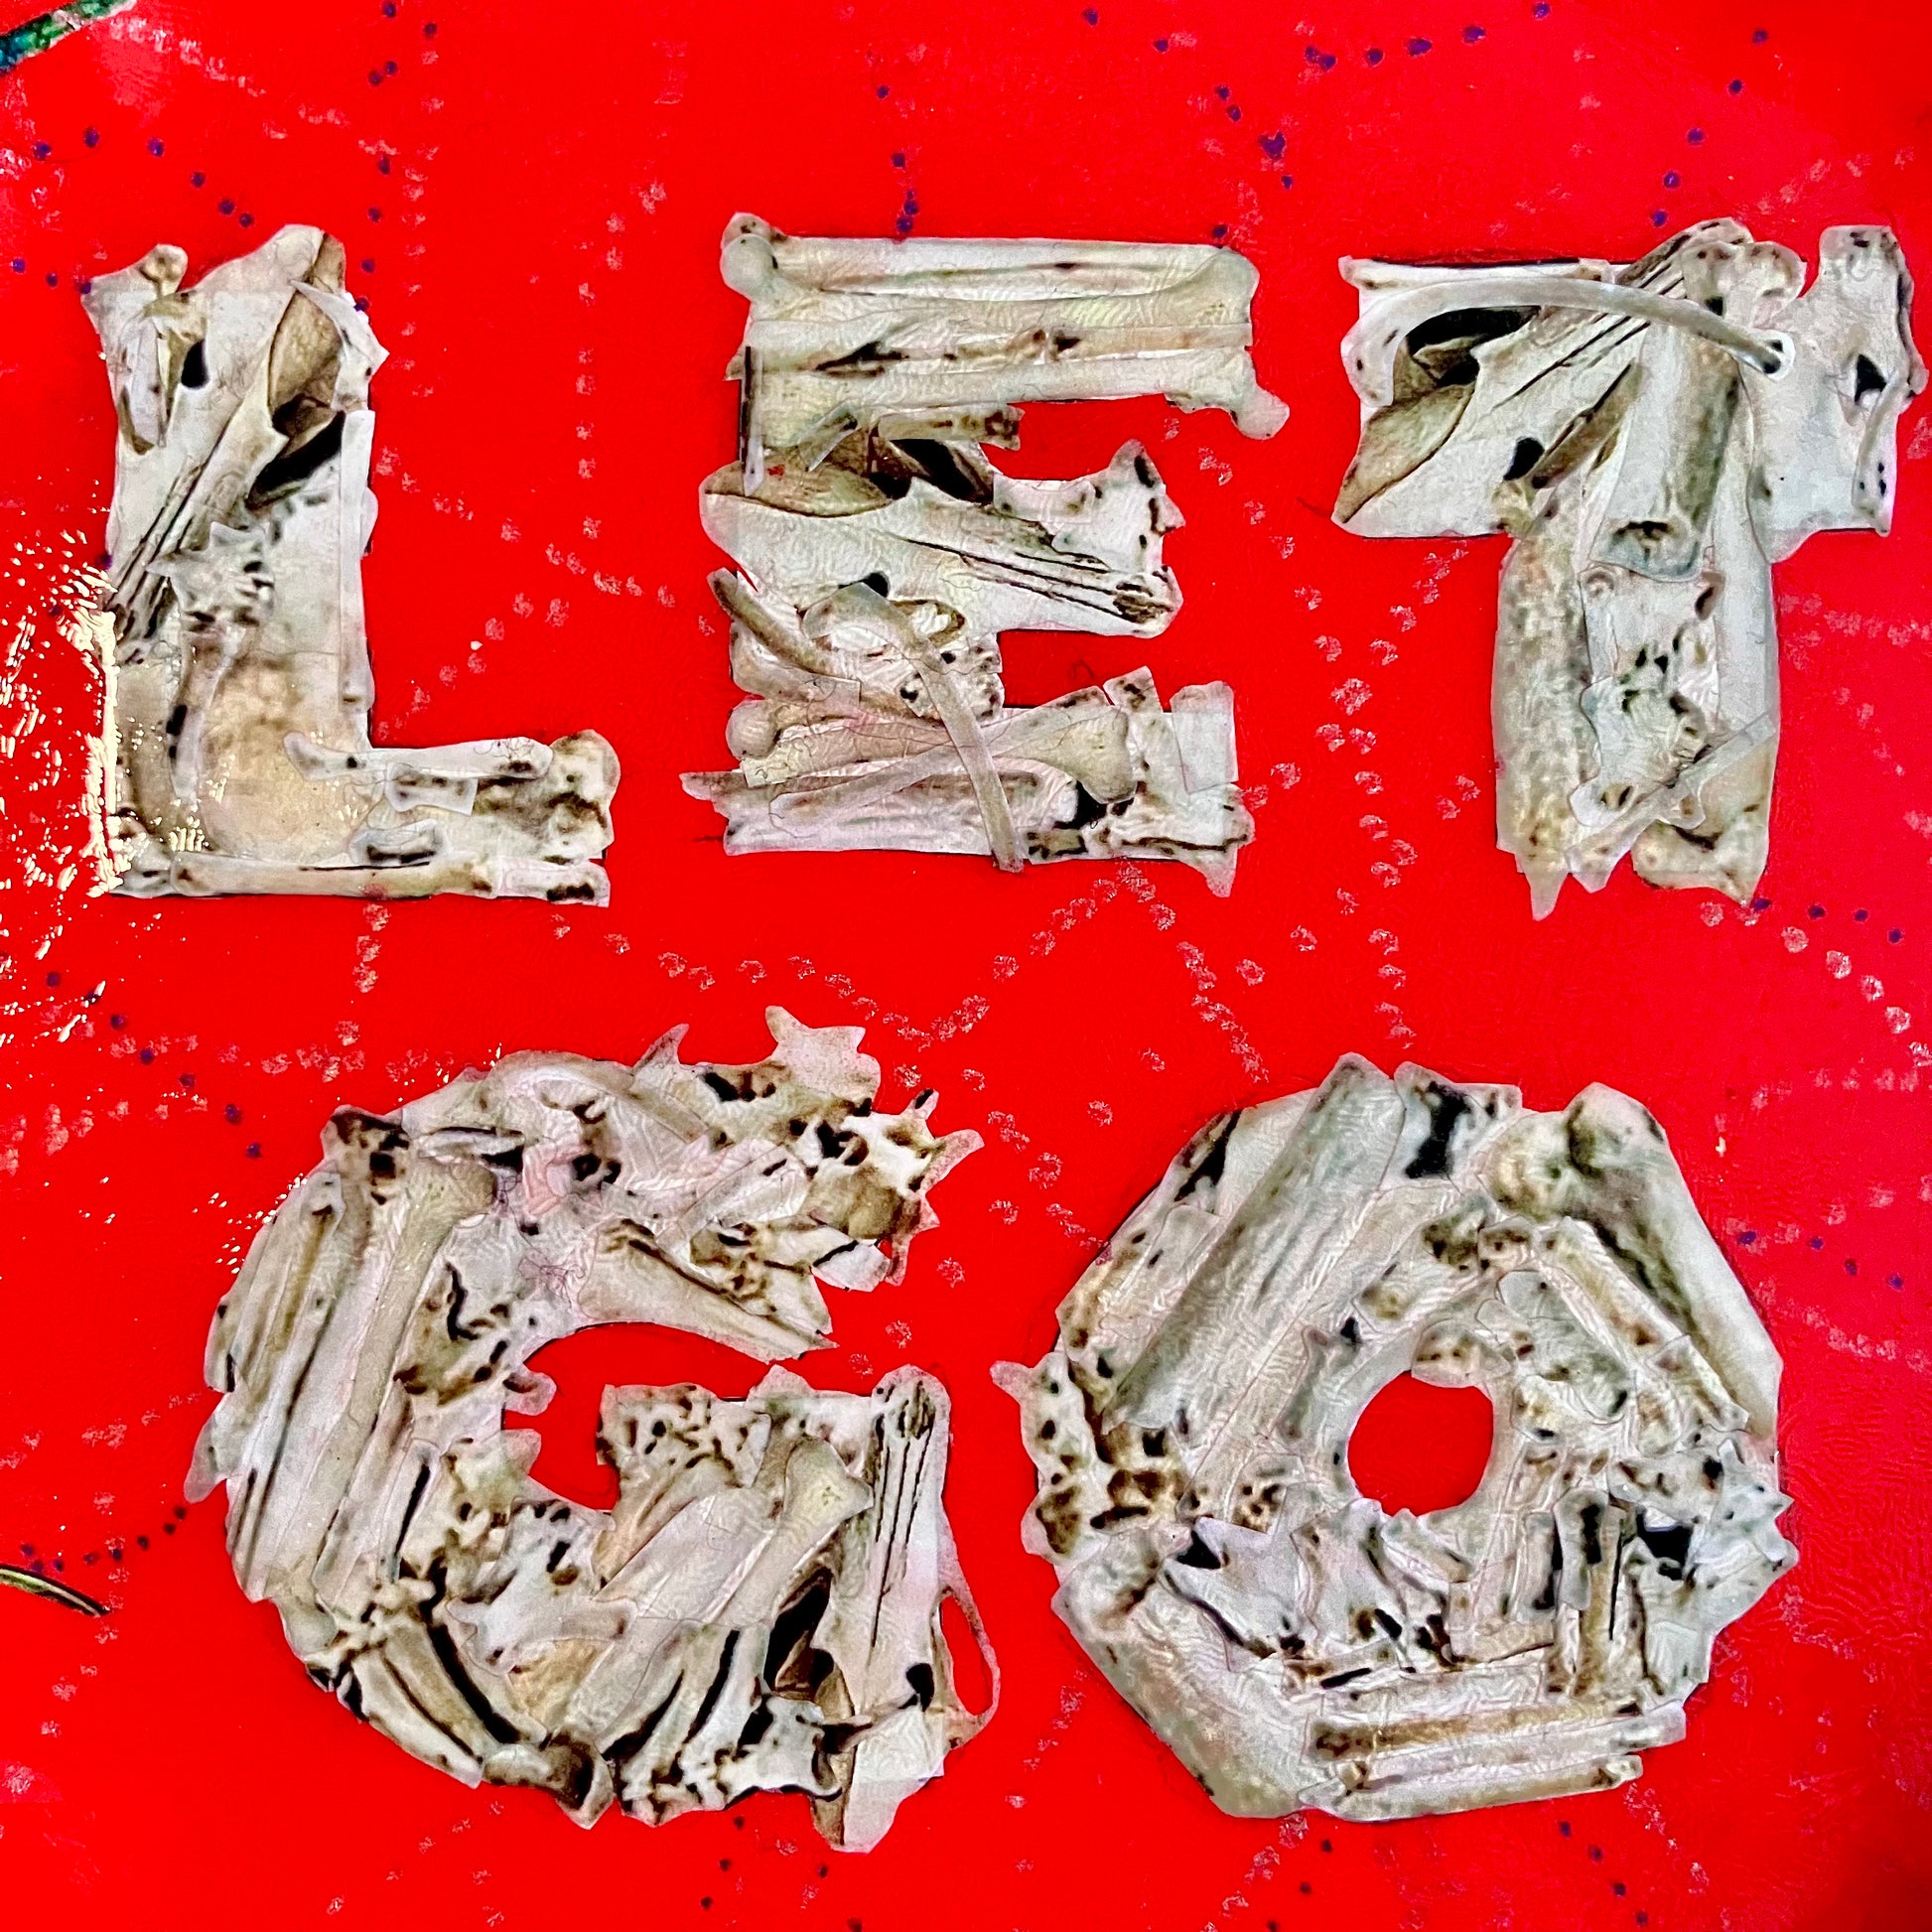 "Let Go" Wall Plate by House of Frisson, closeup detail of the collage showing the words "Let Go" written with bones, against a bright red background.